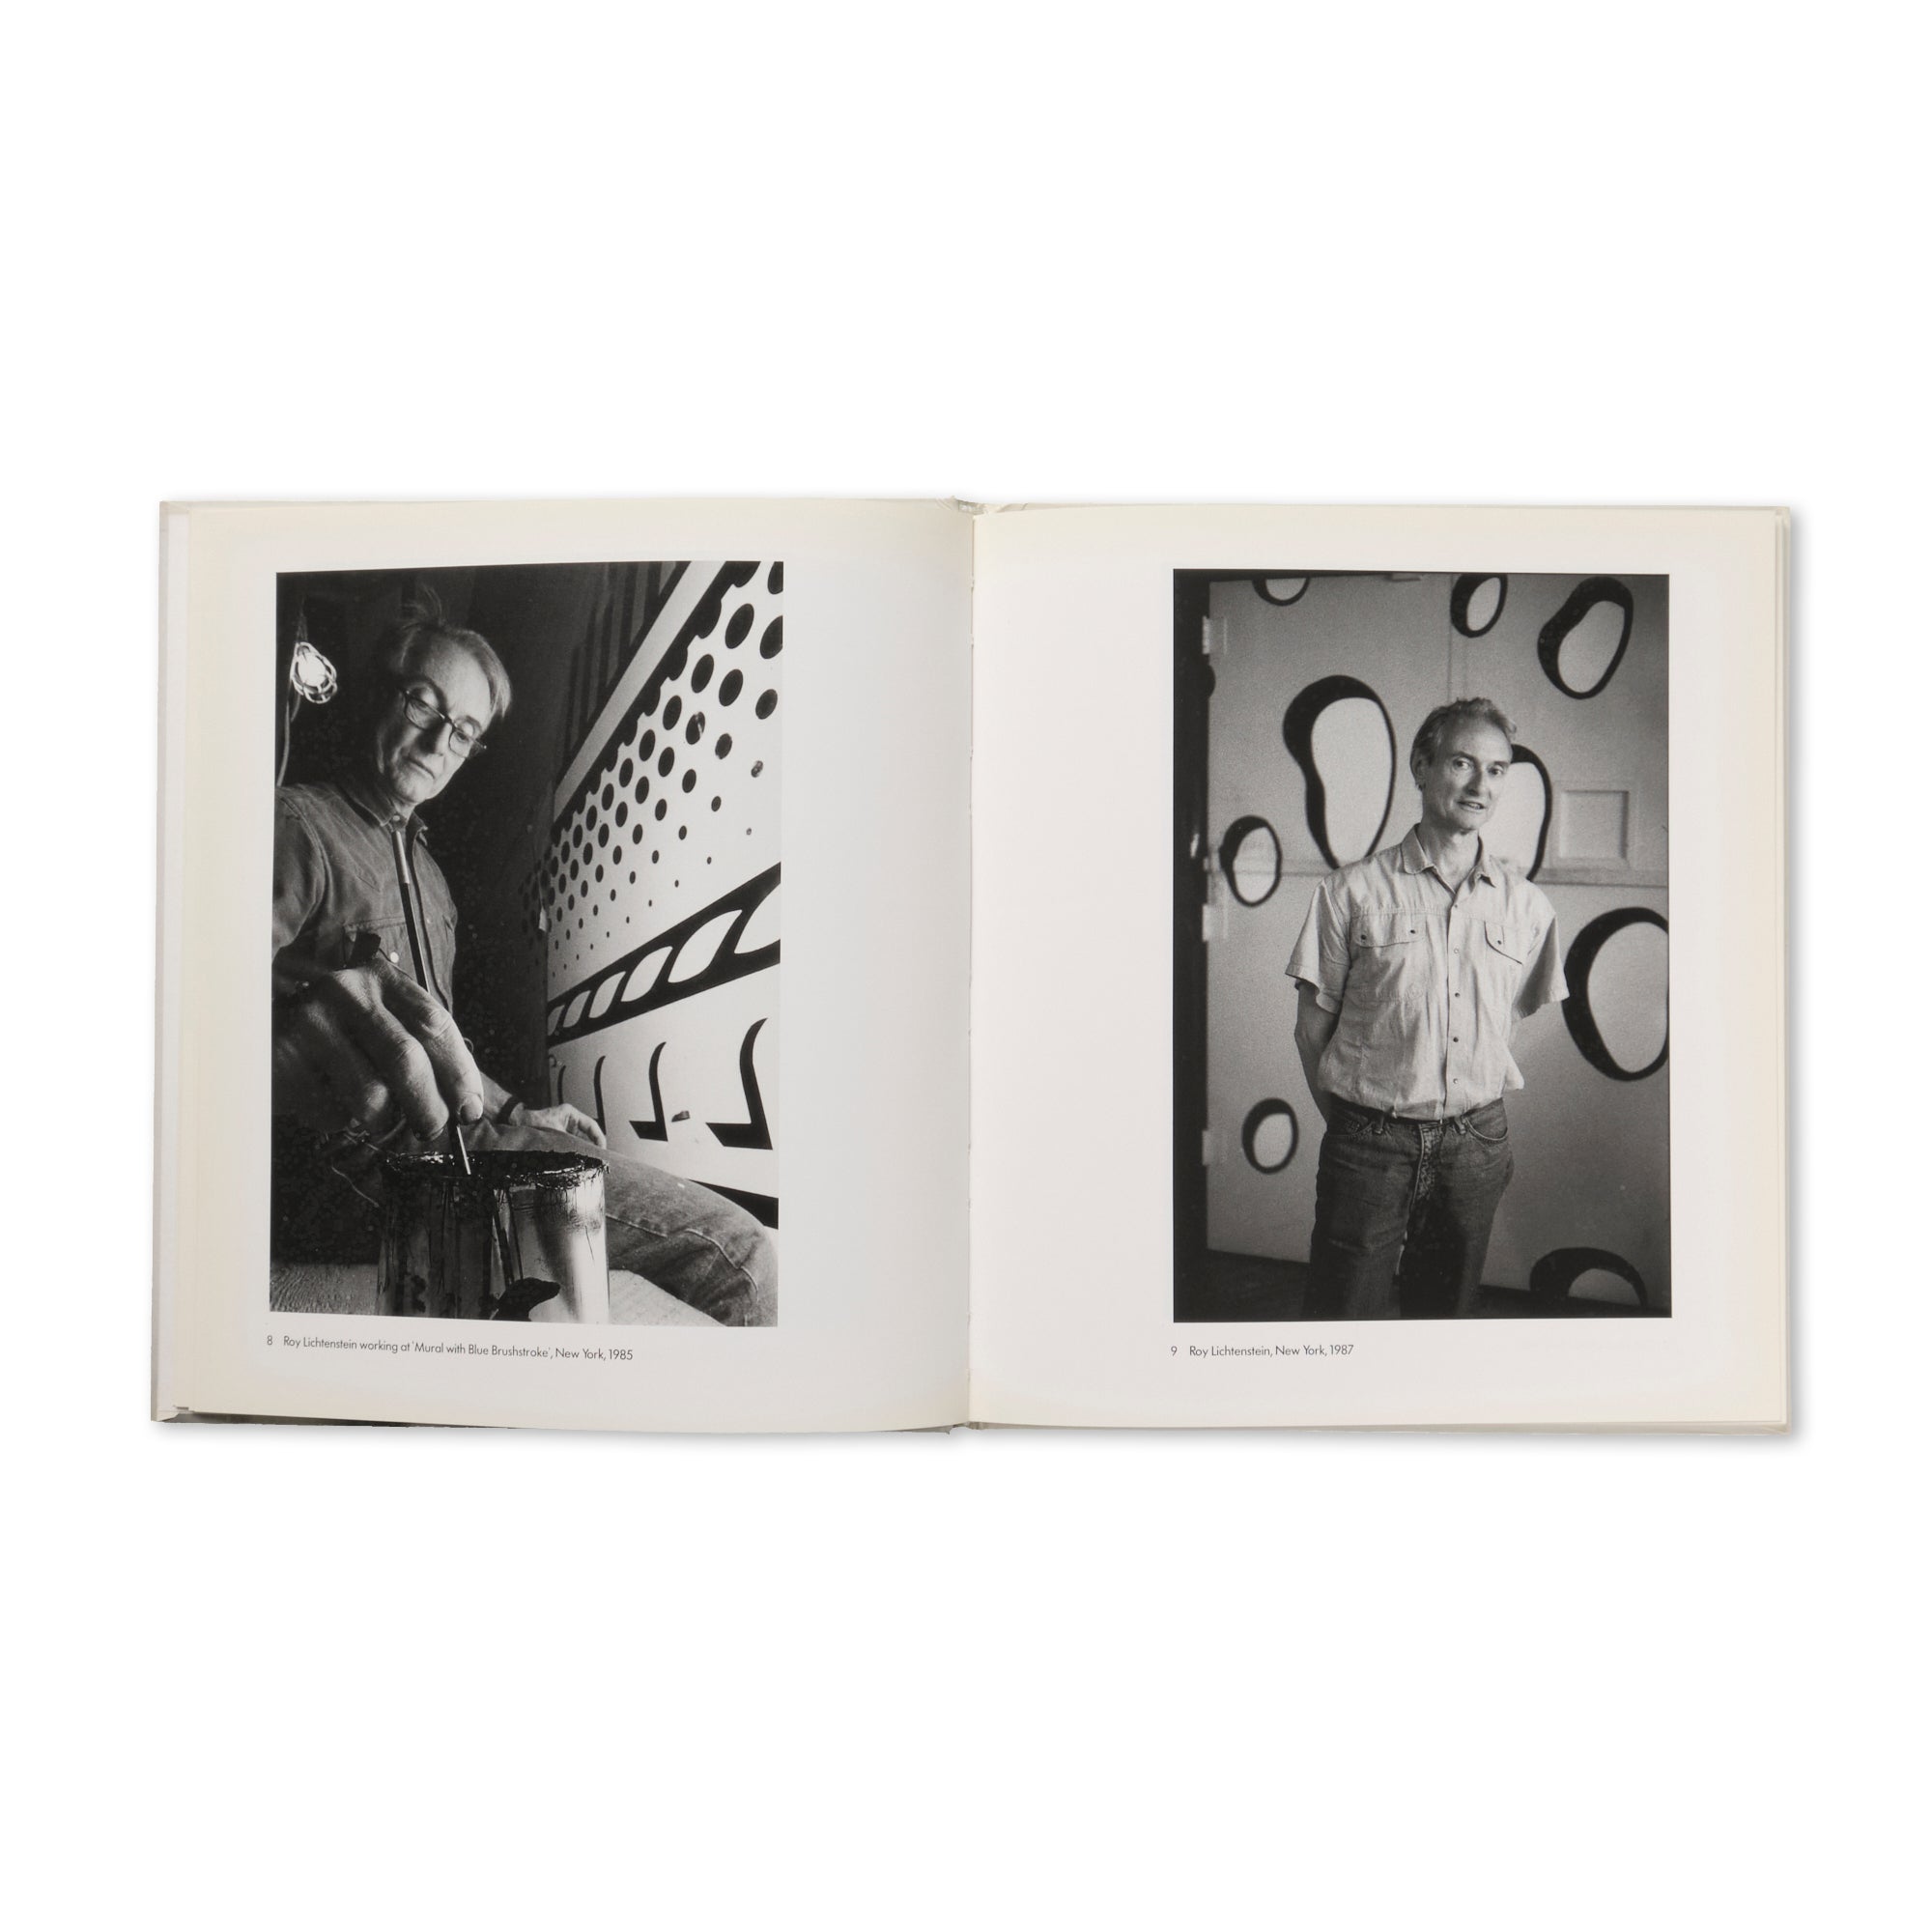 Ari Marcopoulos - Portraits from the Studio and the Street